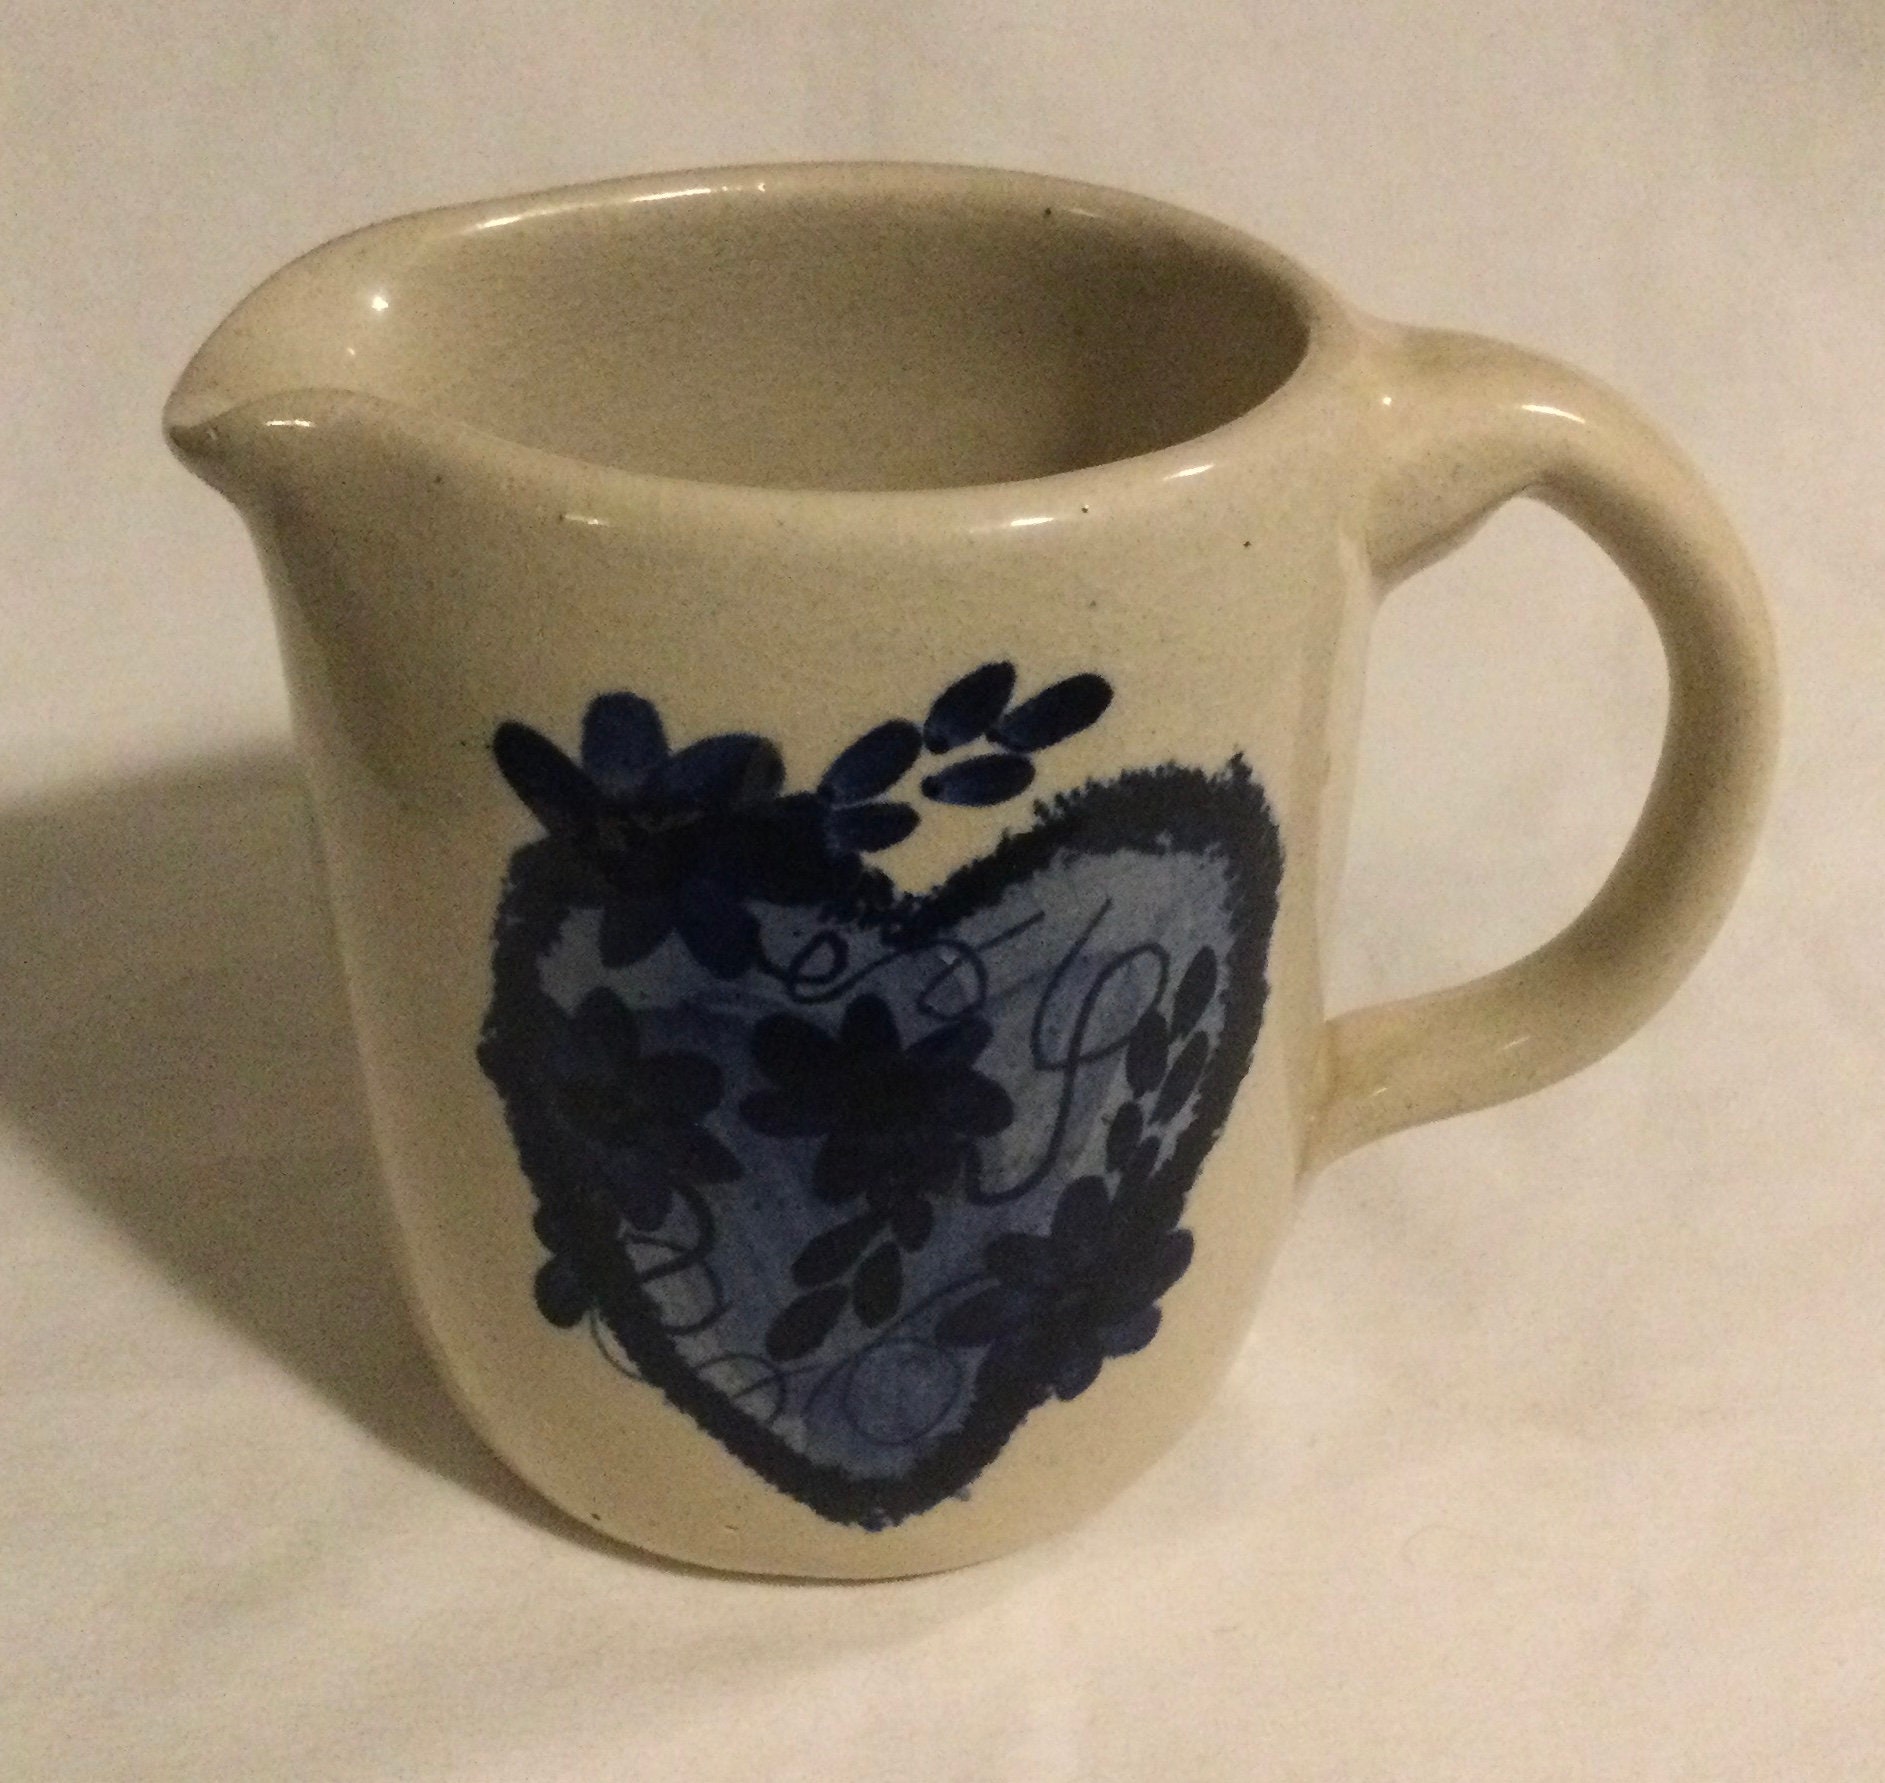 1/2 Gallon belly pitcher - Store - Martinez Pottery in Marshall, TX